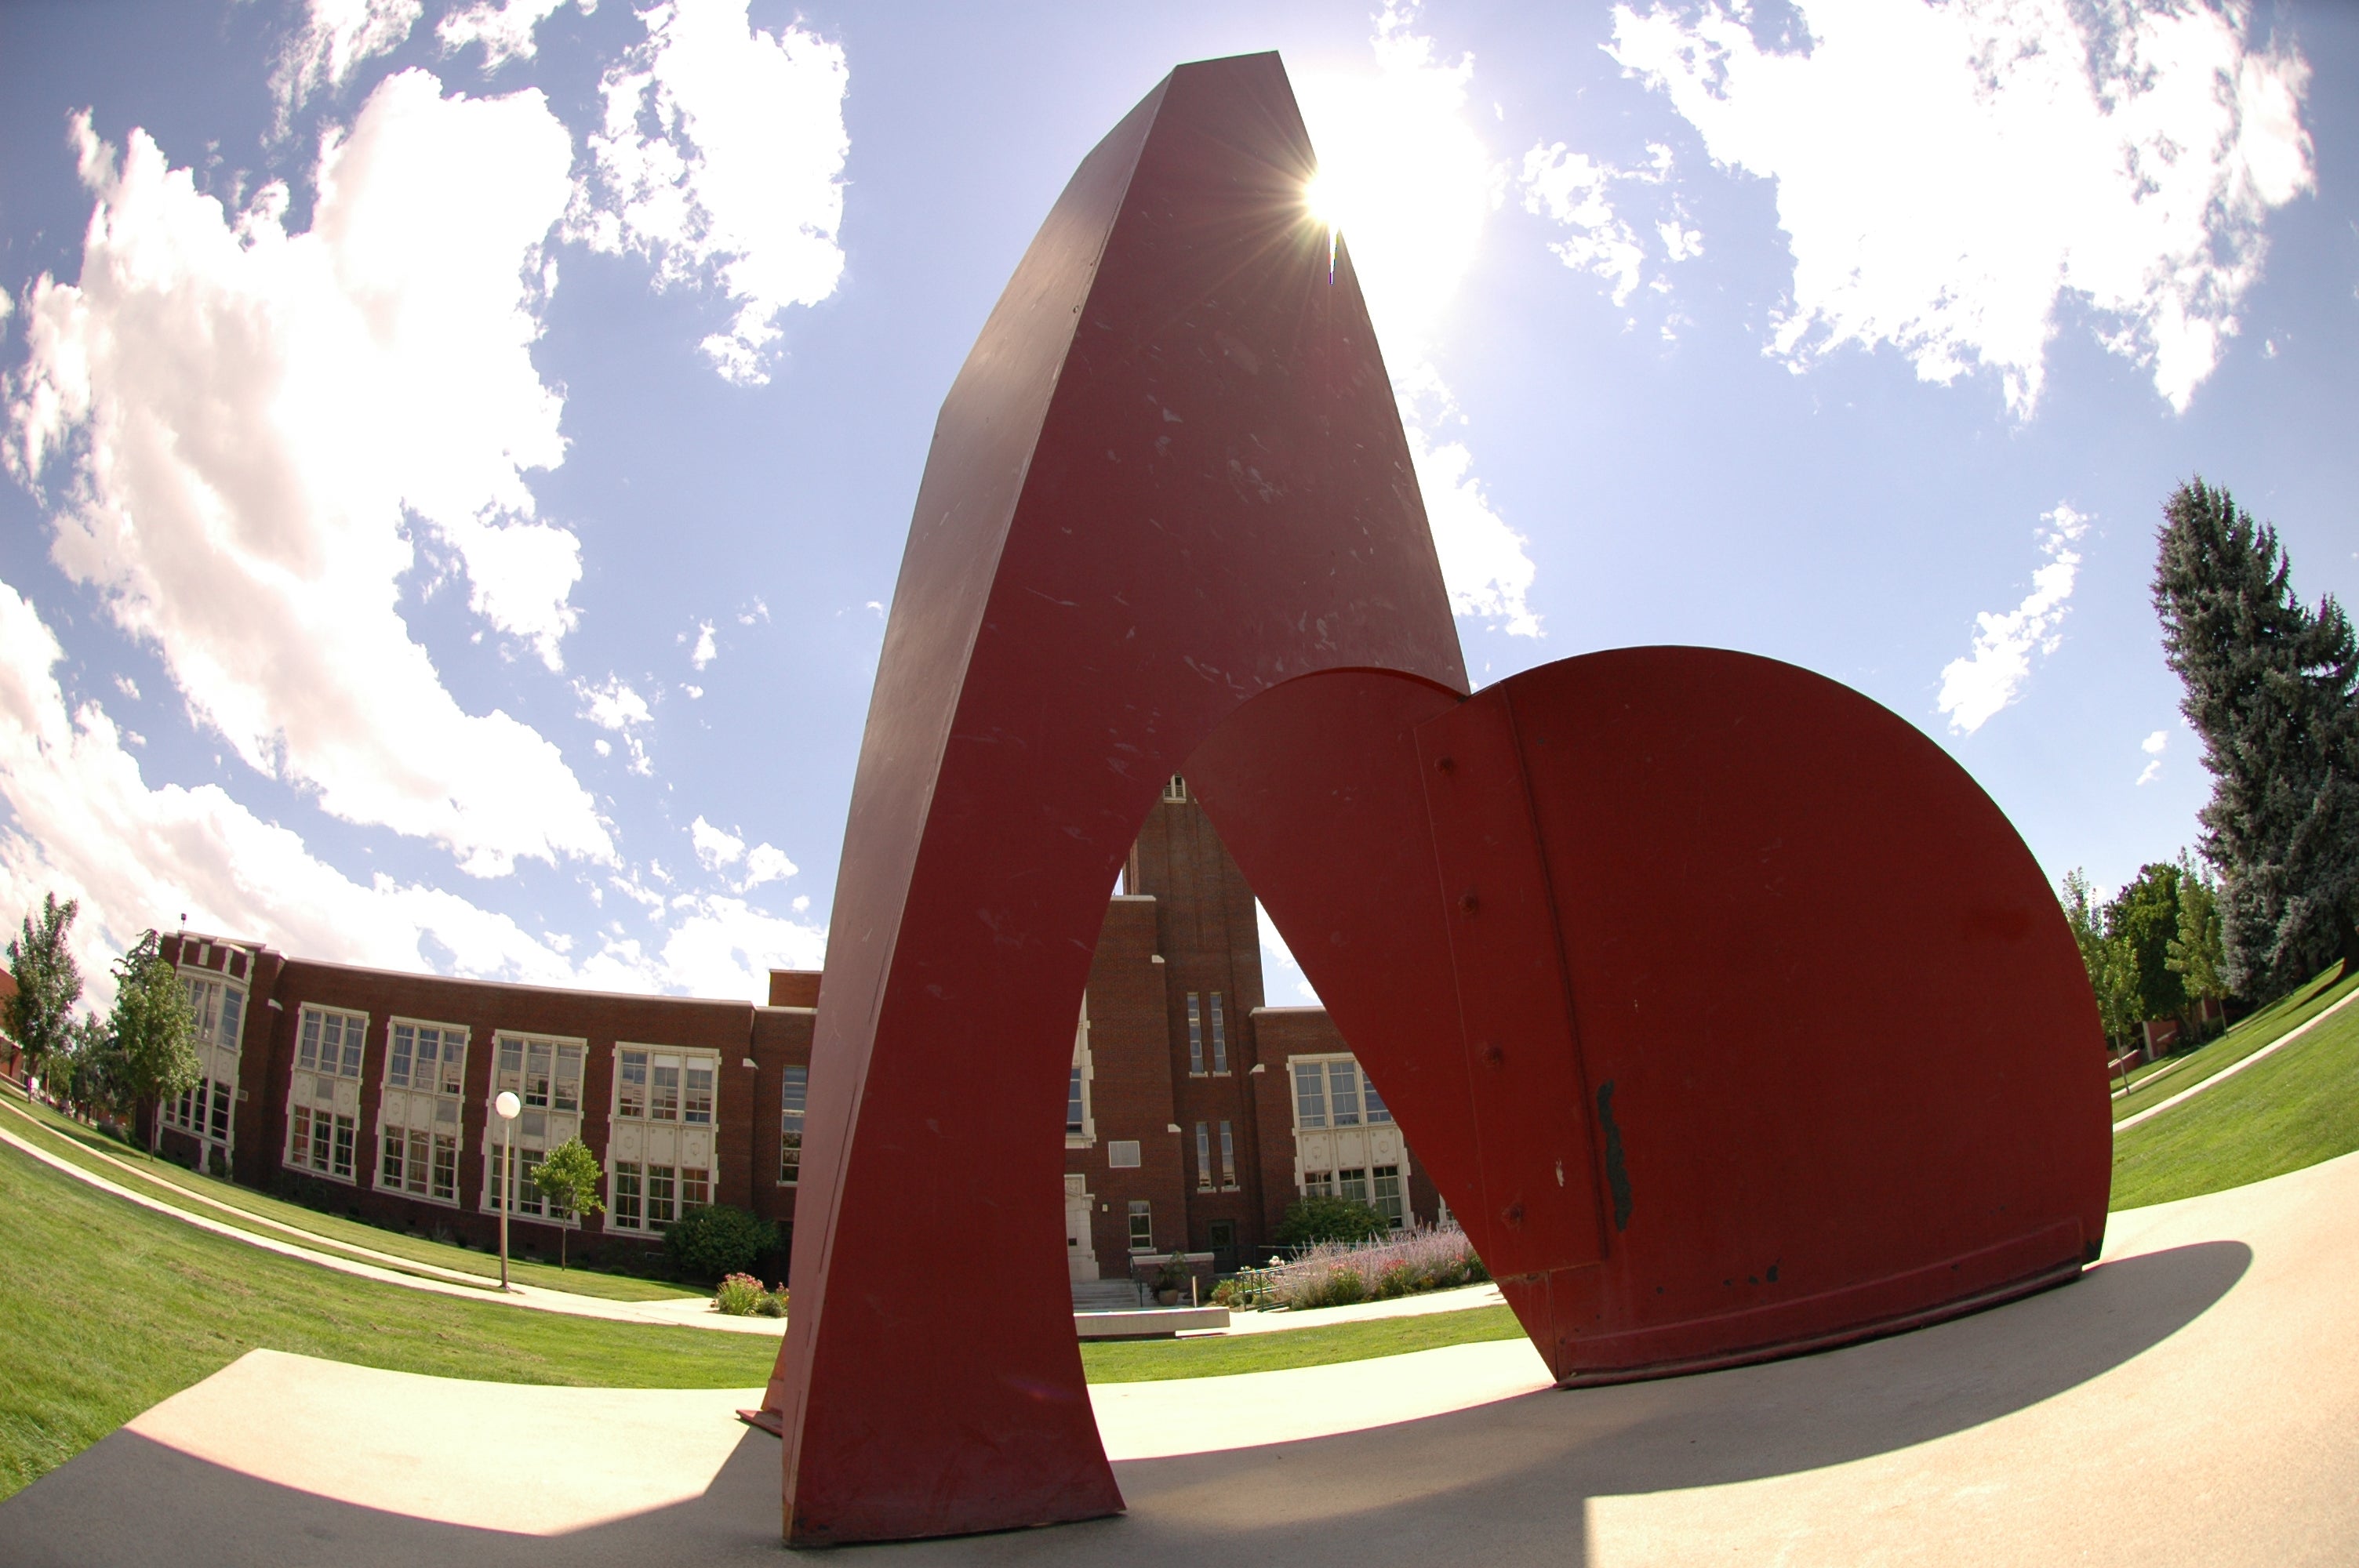 Large red steel sculpture on Boise State's quad